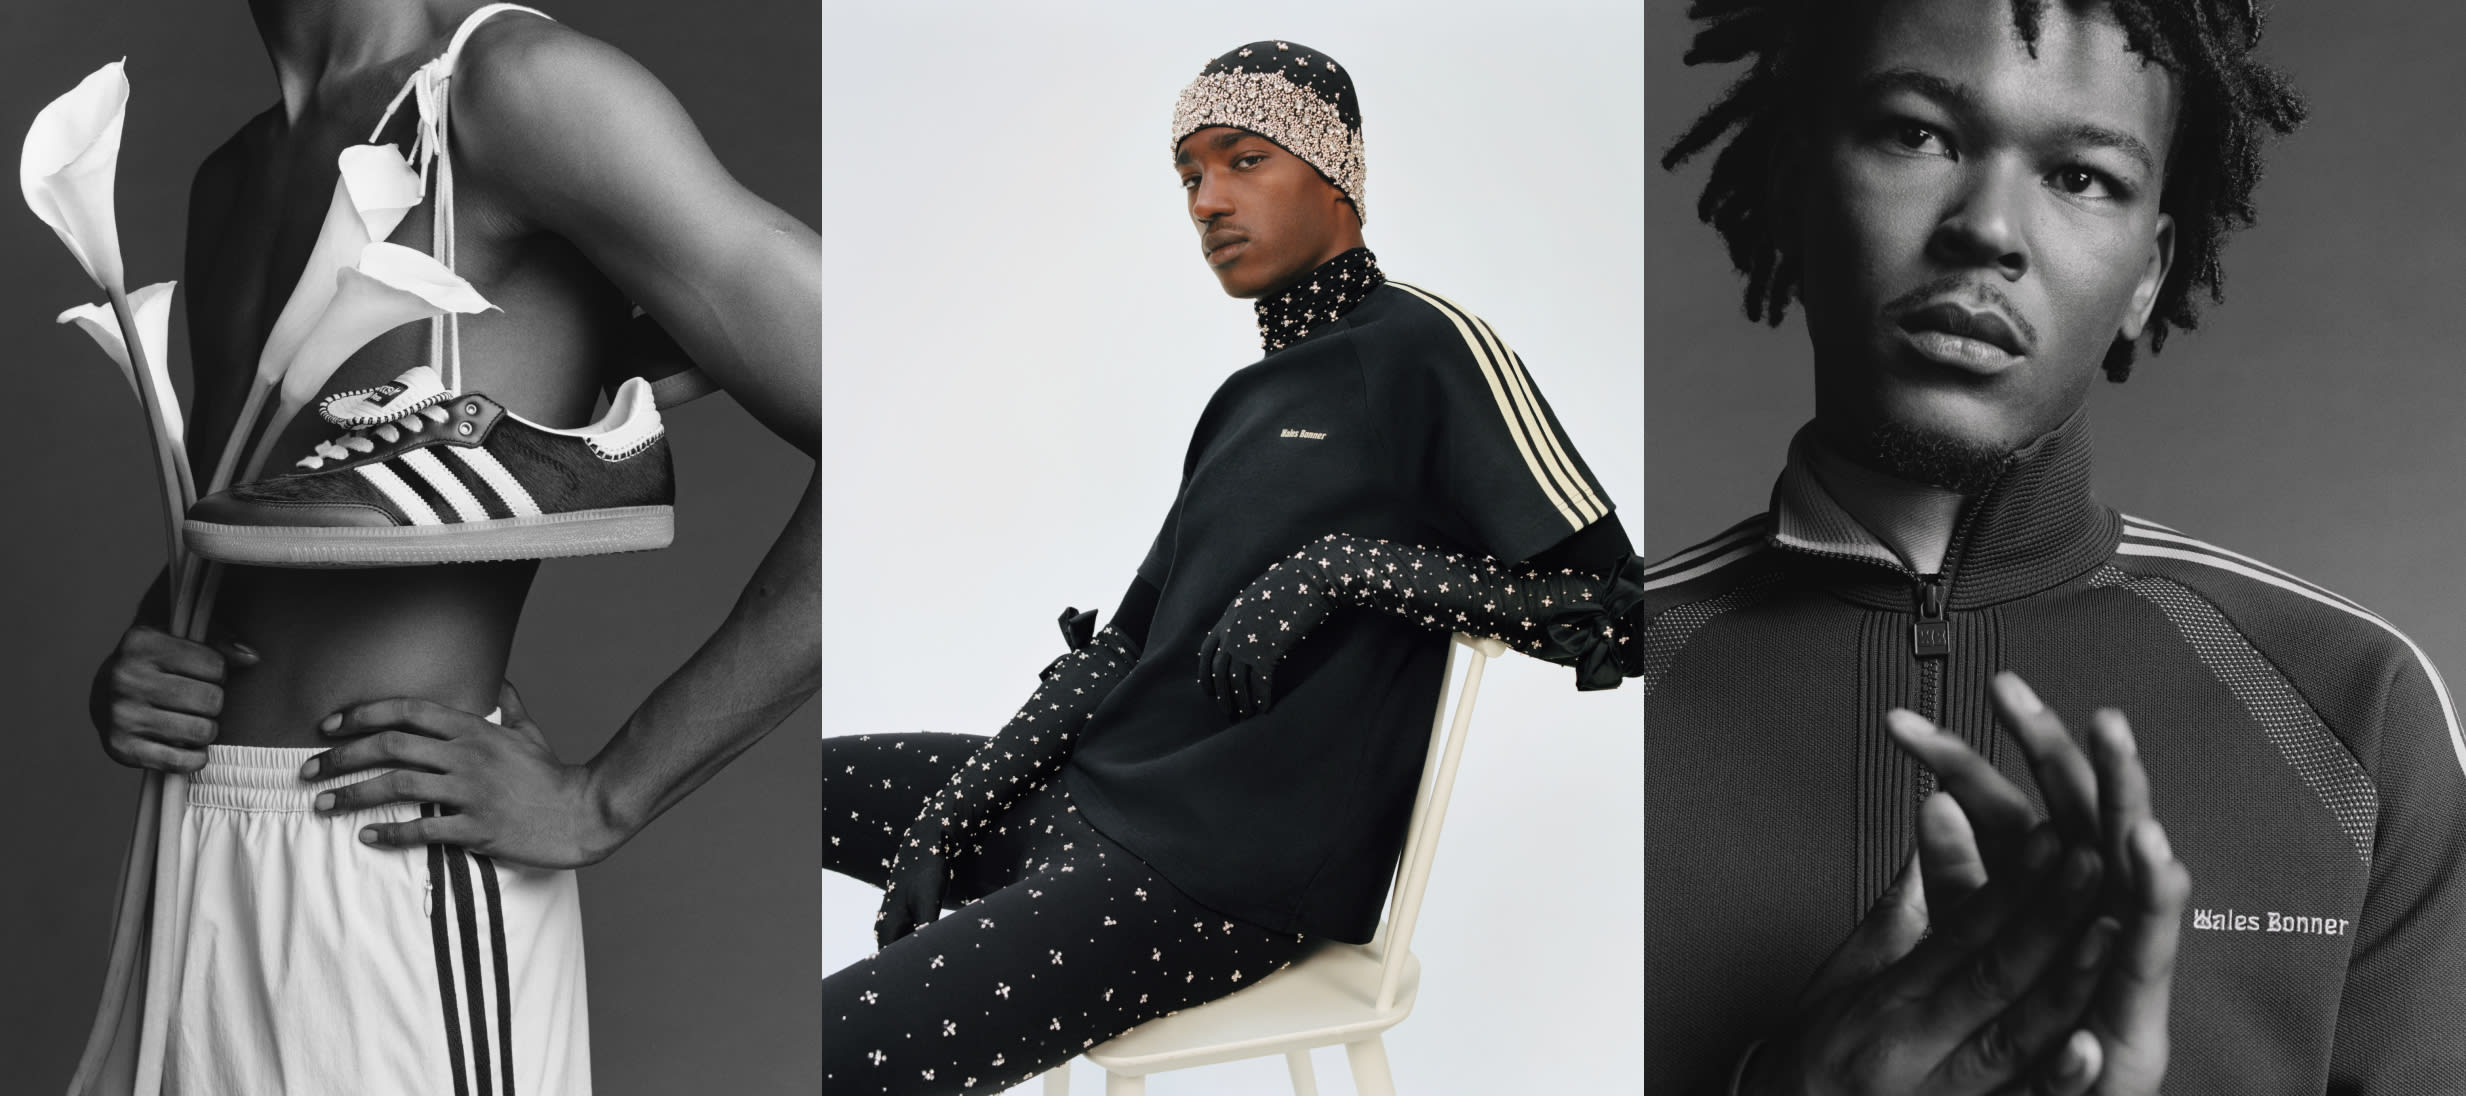 3 separate images are shown of models wearing the adidas Originals my Wales Bonner collection.